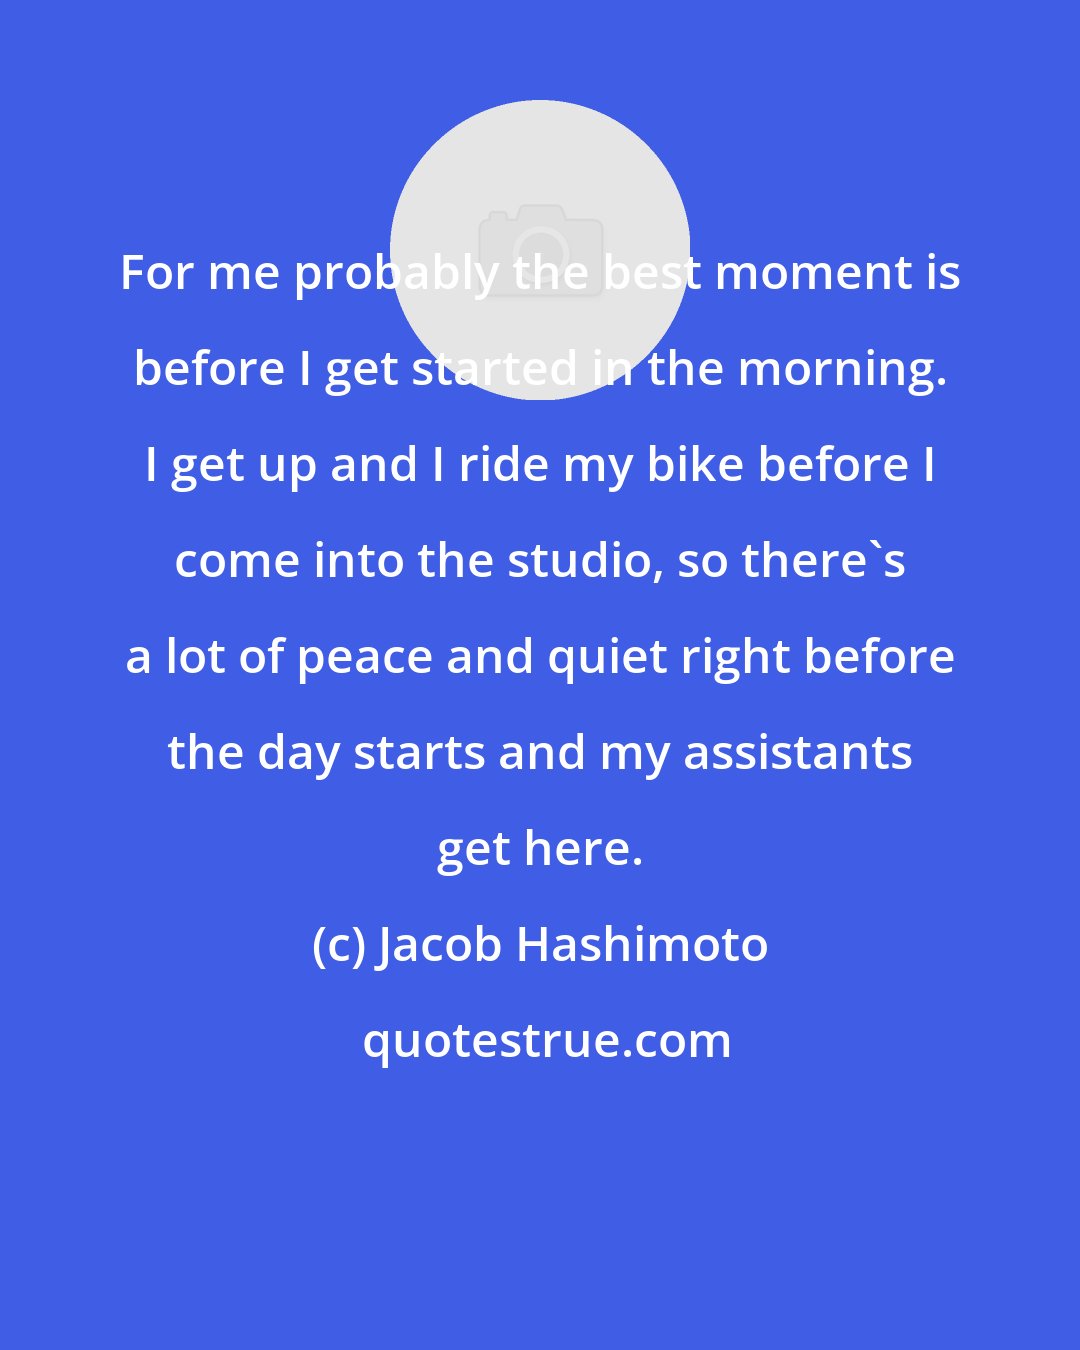 Jacob Hashimoto: For me probably the best moment is before I get started in the morning. I get up and I ride my bike before I come into the studio, so there's a lot of peace and quiet right before the day starts and my assistants get here.